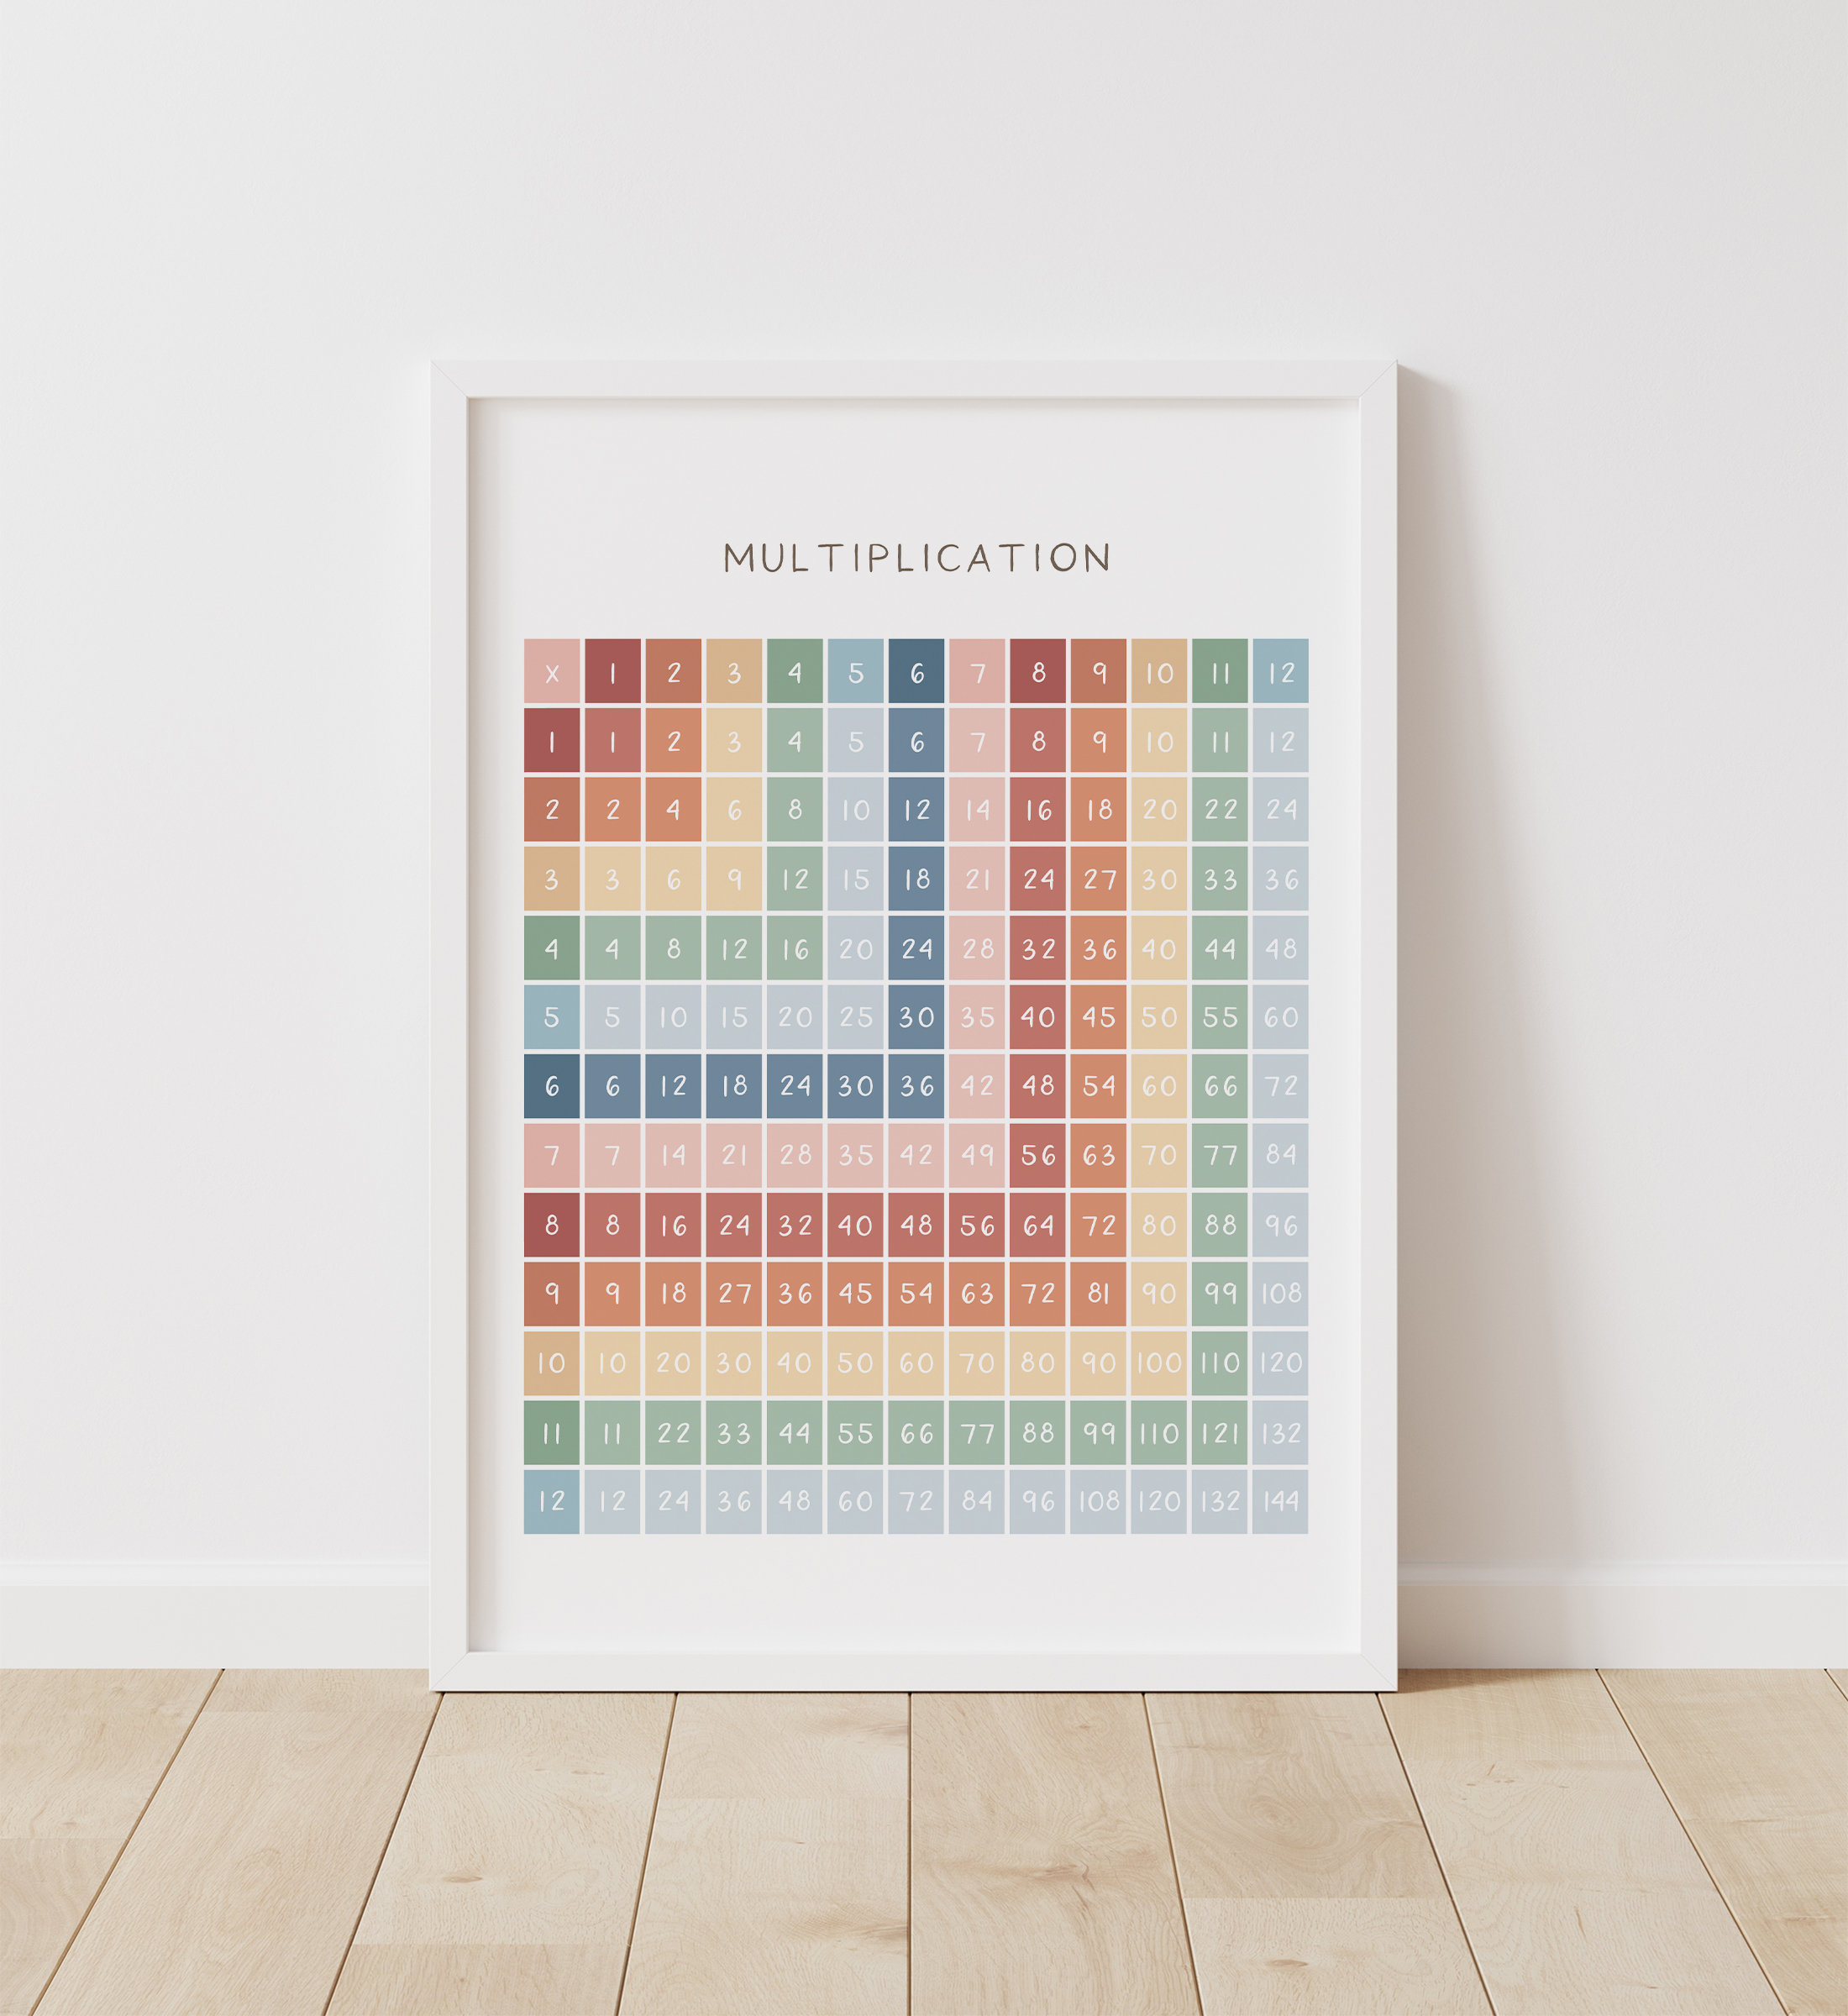 Kids Educational Math Poster 112 Multiplication Table Canvas Wall Art ▻   ▻ Free Shipping ▻ Up to 70% OFF